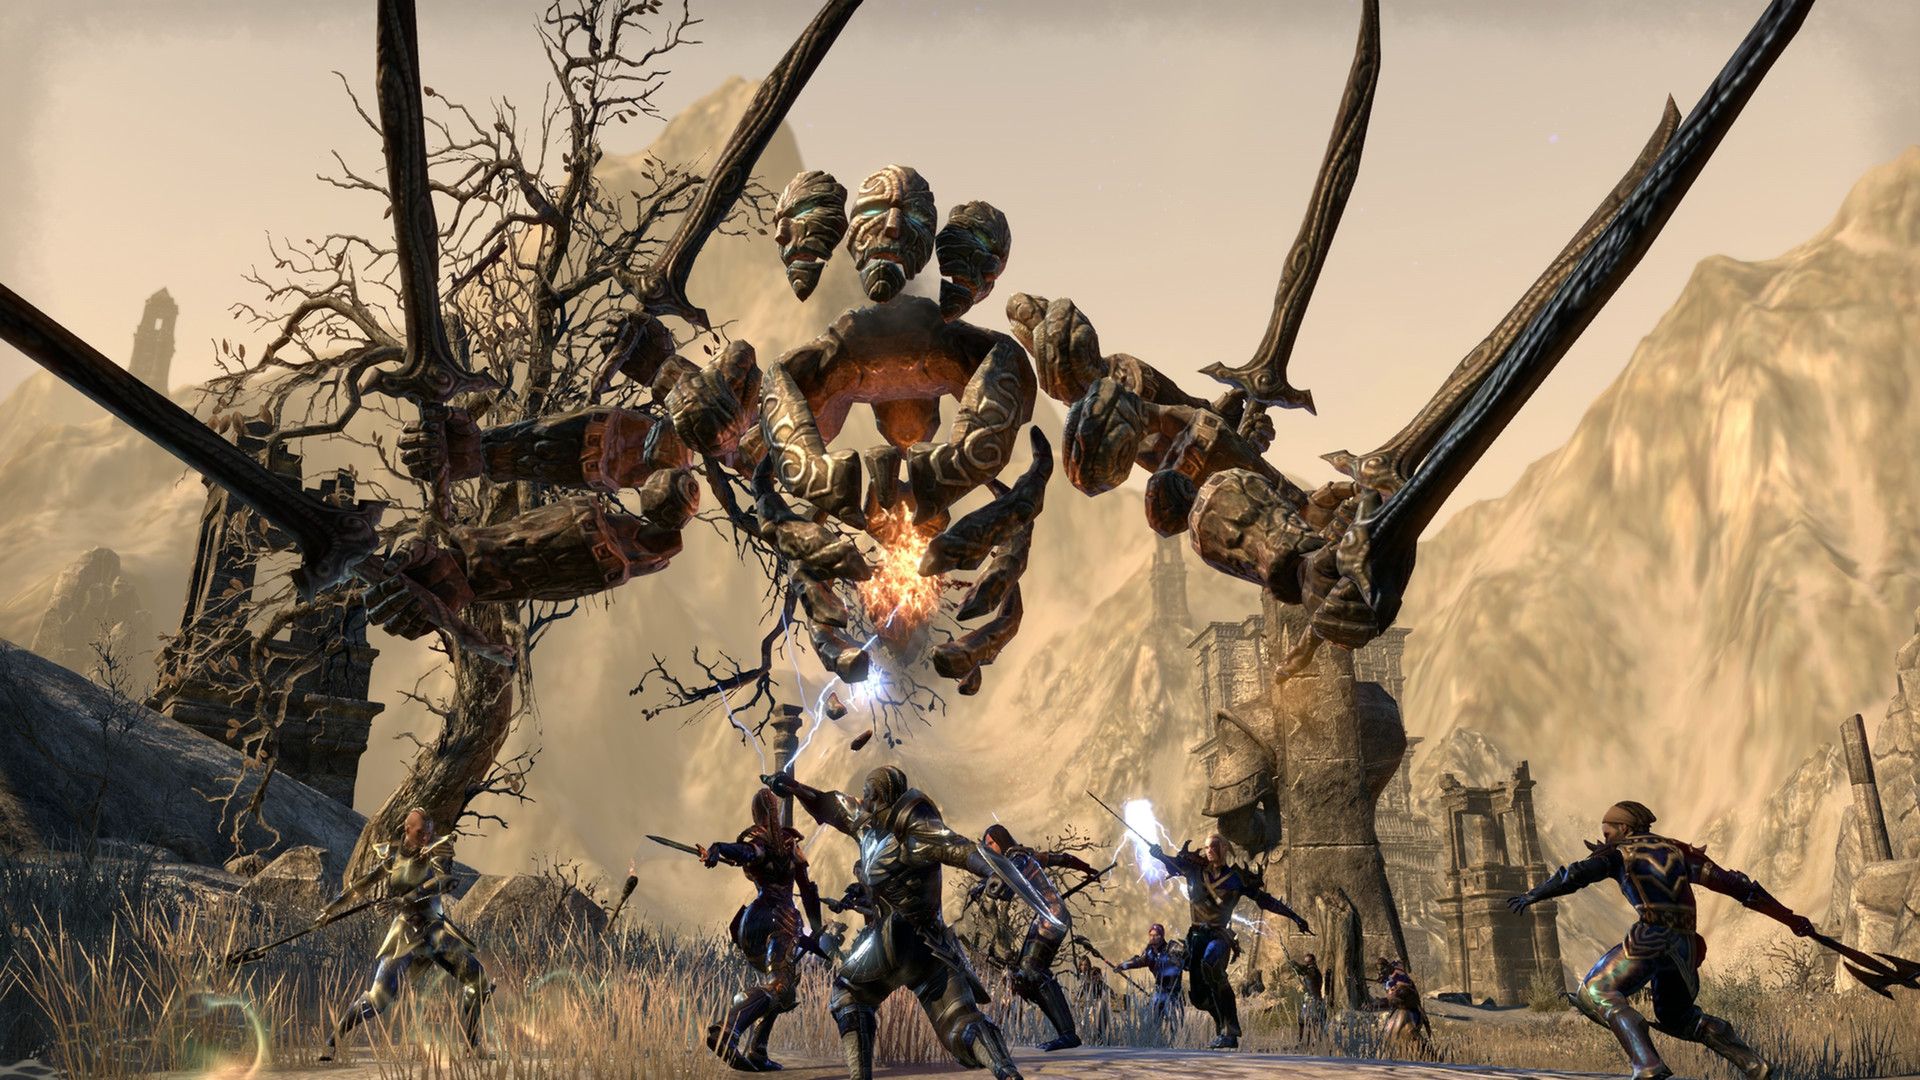 Video game screenshot of a group of armored warriors battling a giant skeletal monster